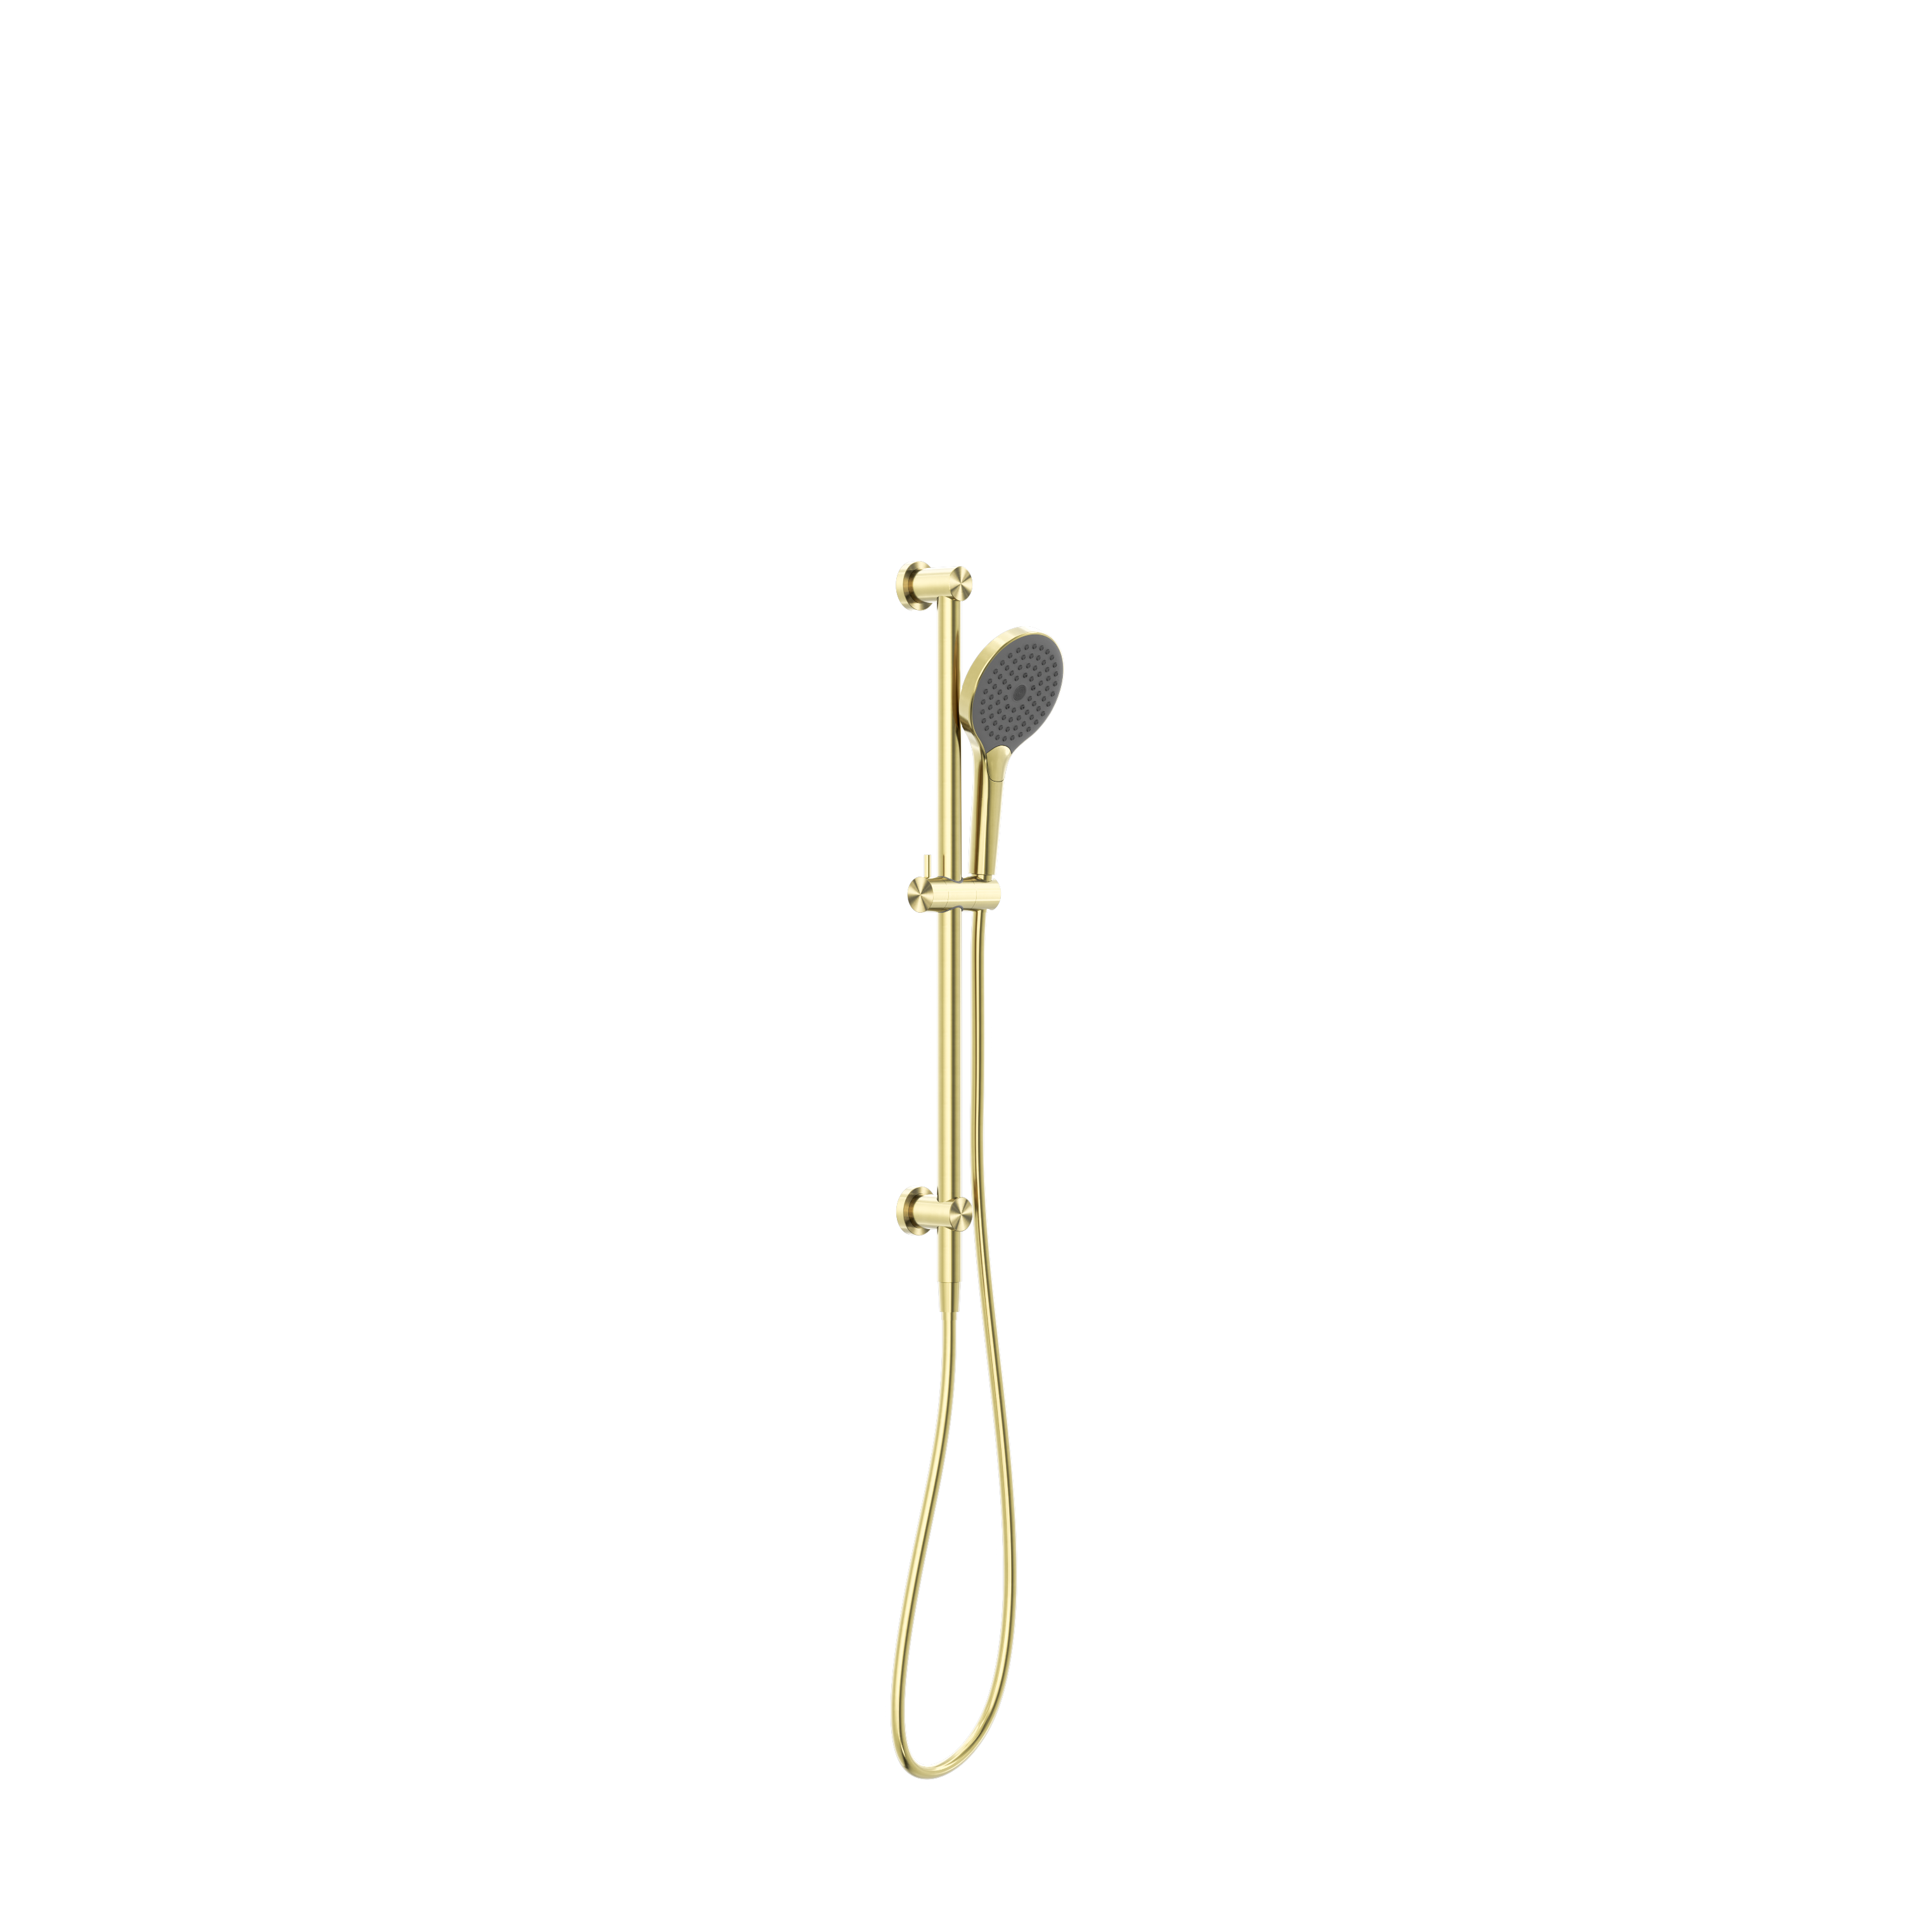 NERO MECCA SHOWER RAIL WITH AIR SHOWER II BRUSHED GOLD